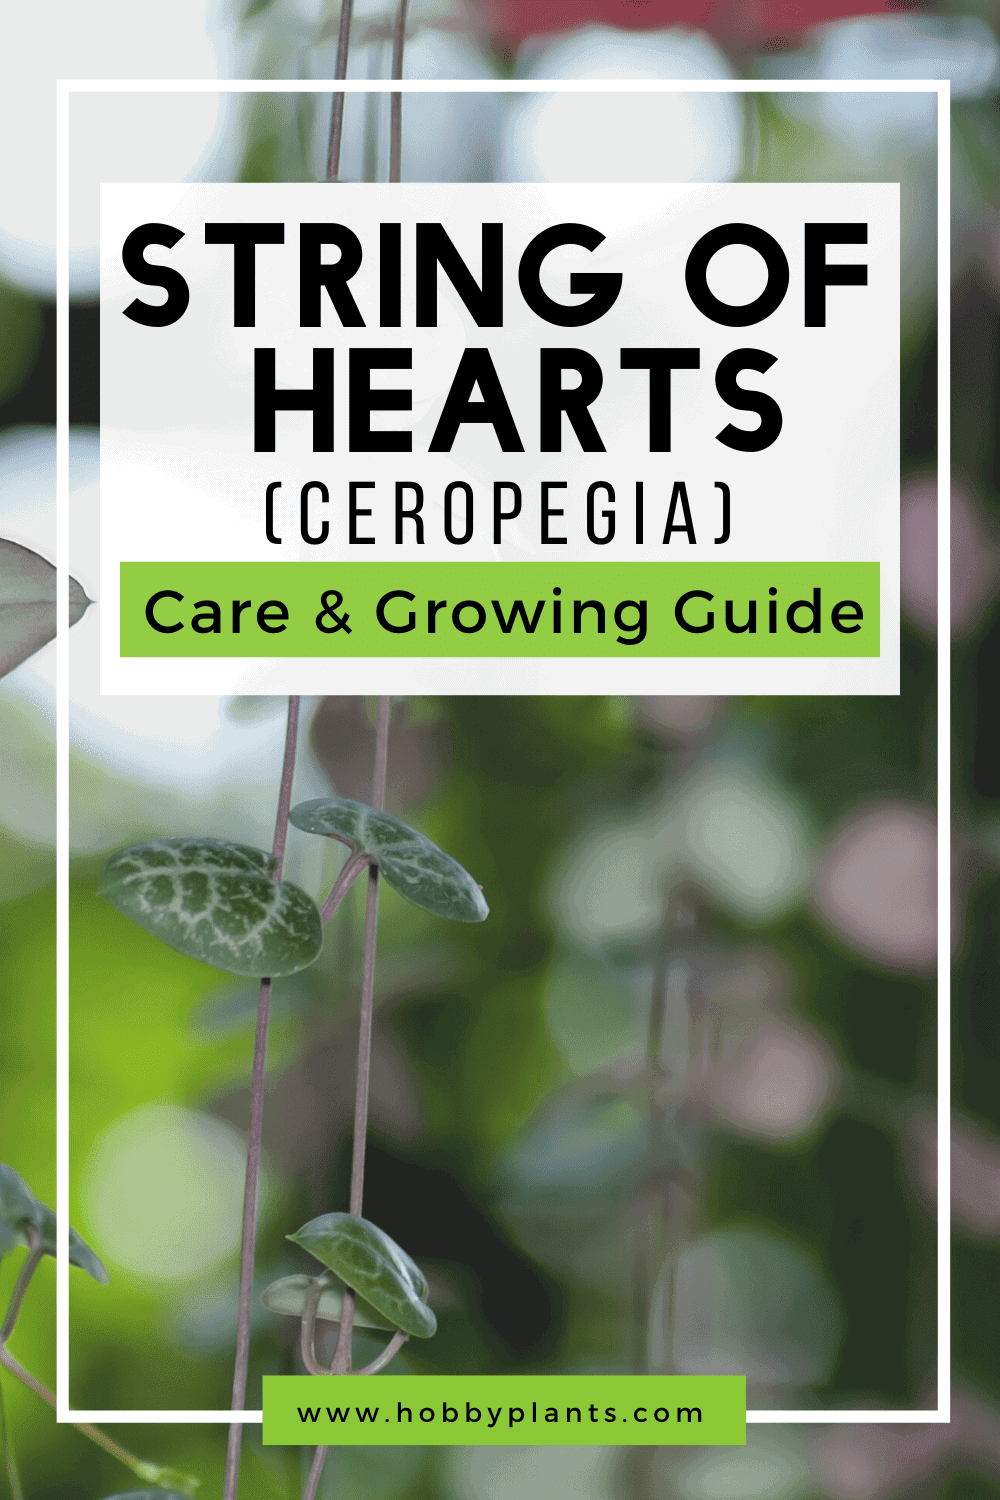 String of Hearts Care